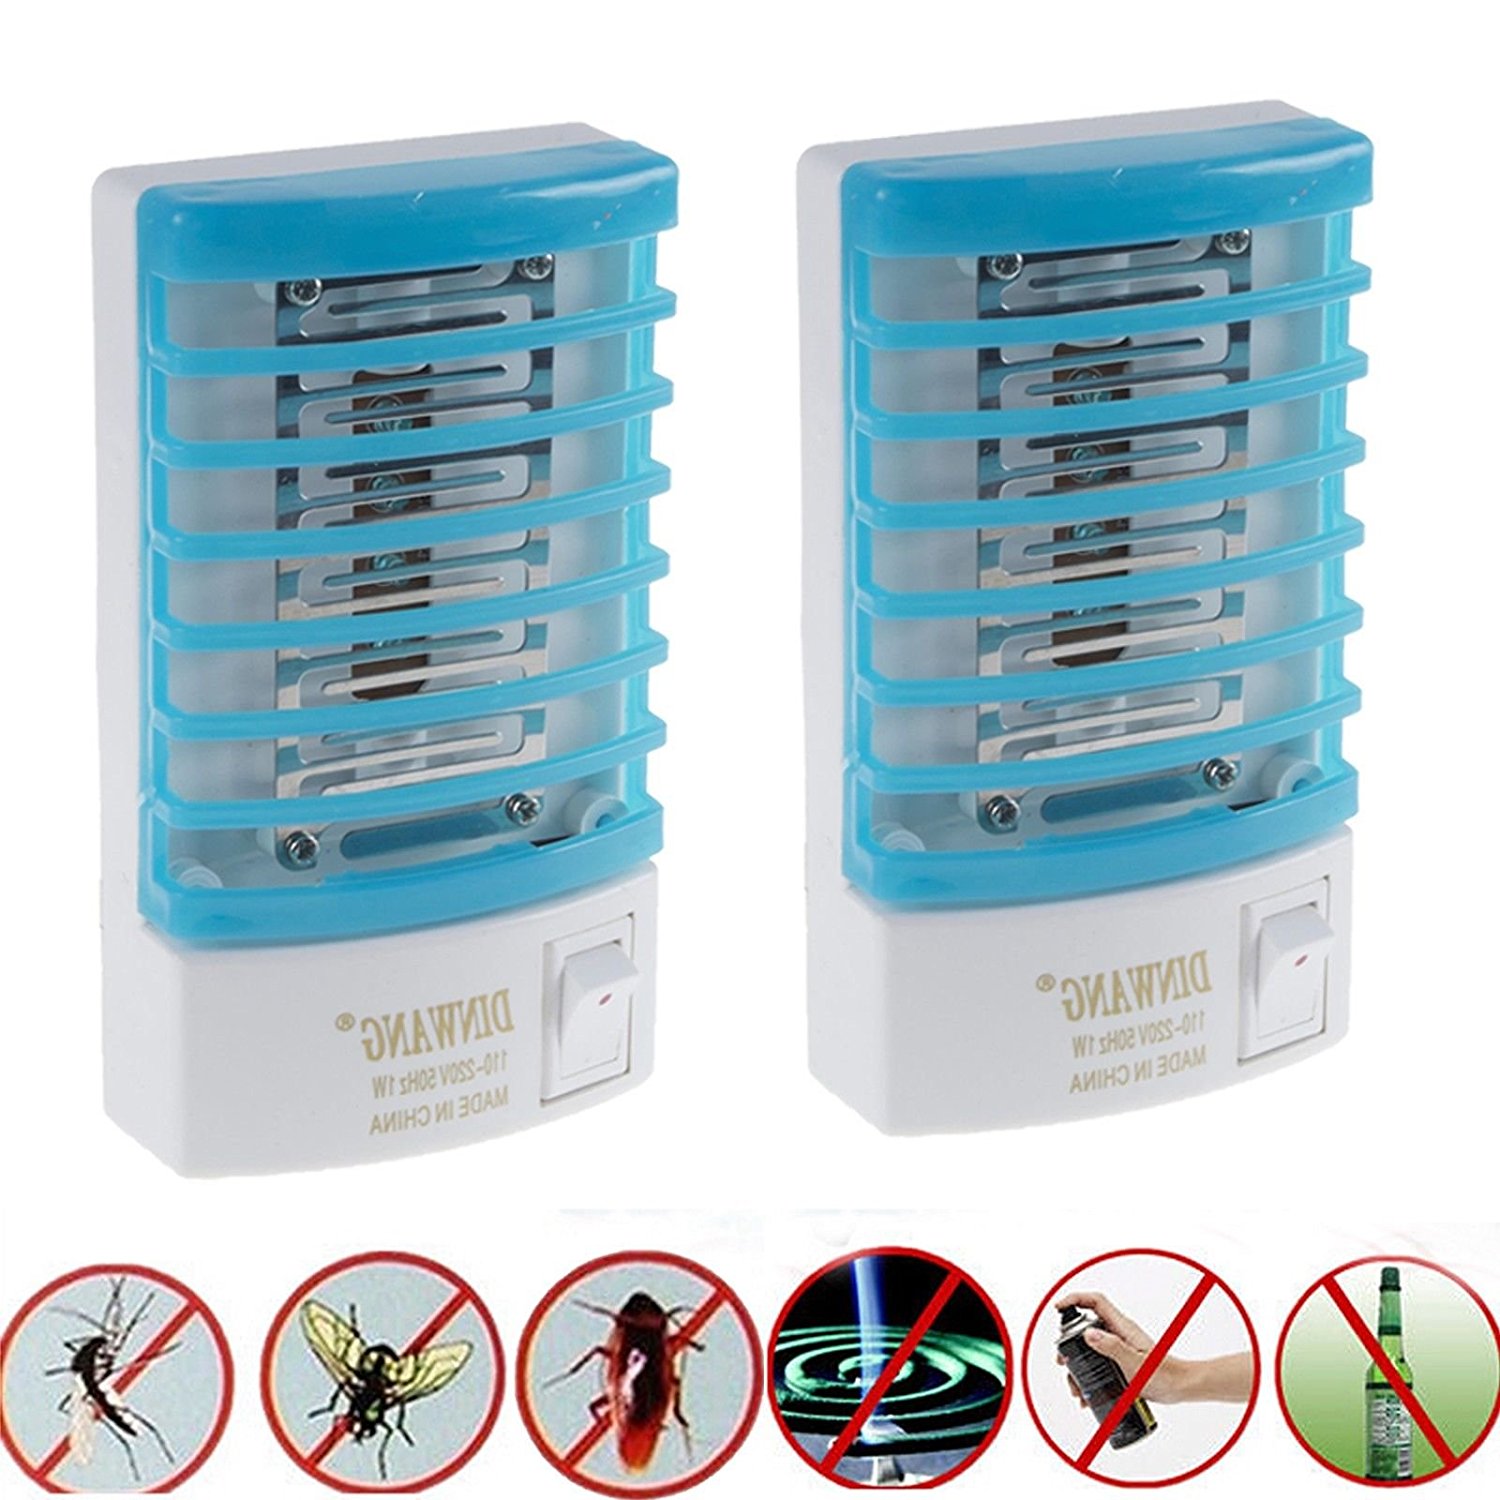 7-2x-indoor-led-electric-mosquito-fly-bug-insect-trap-zapper-killer-night-lamp